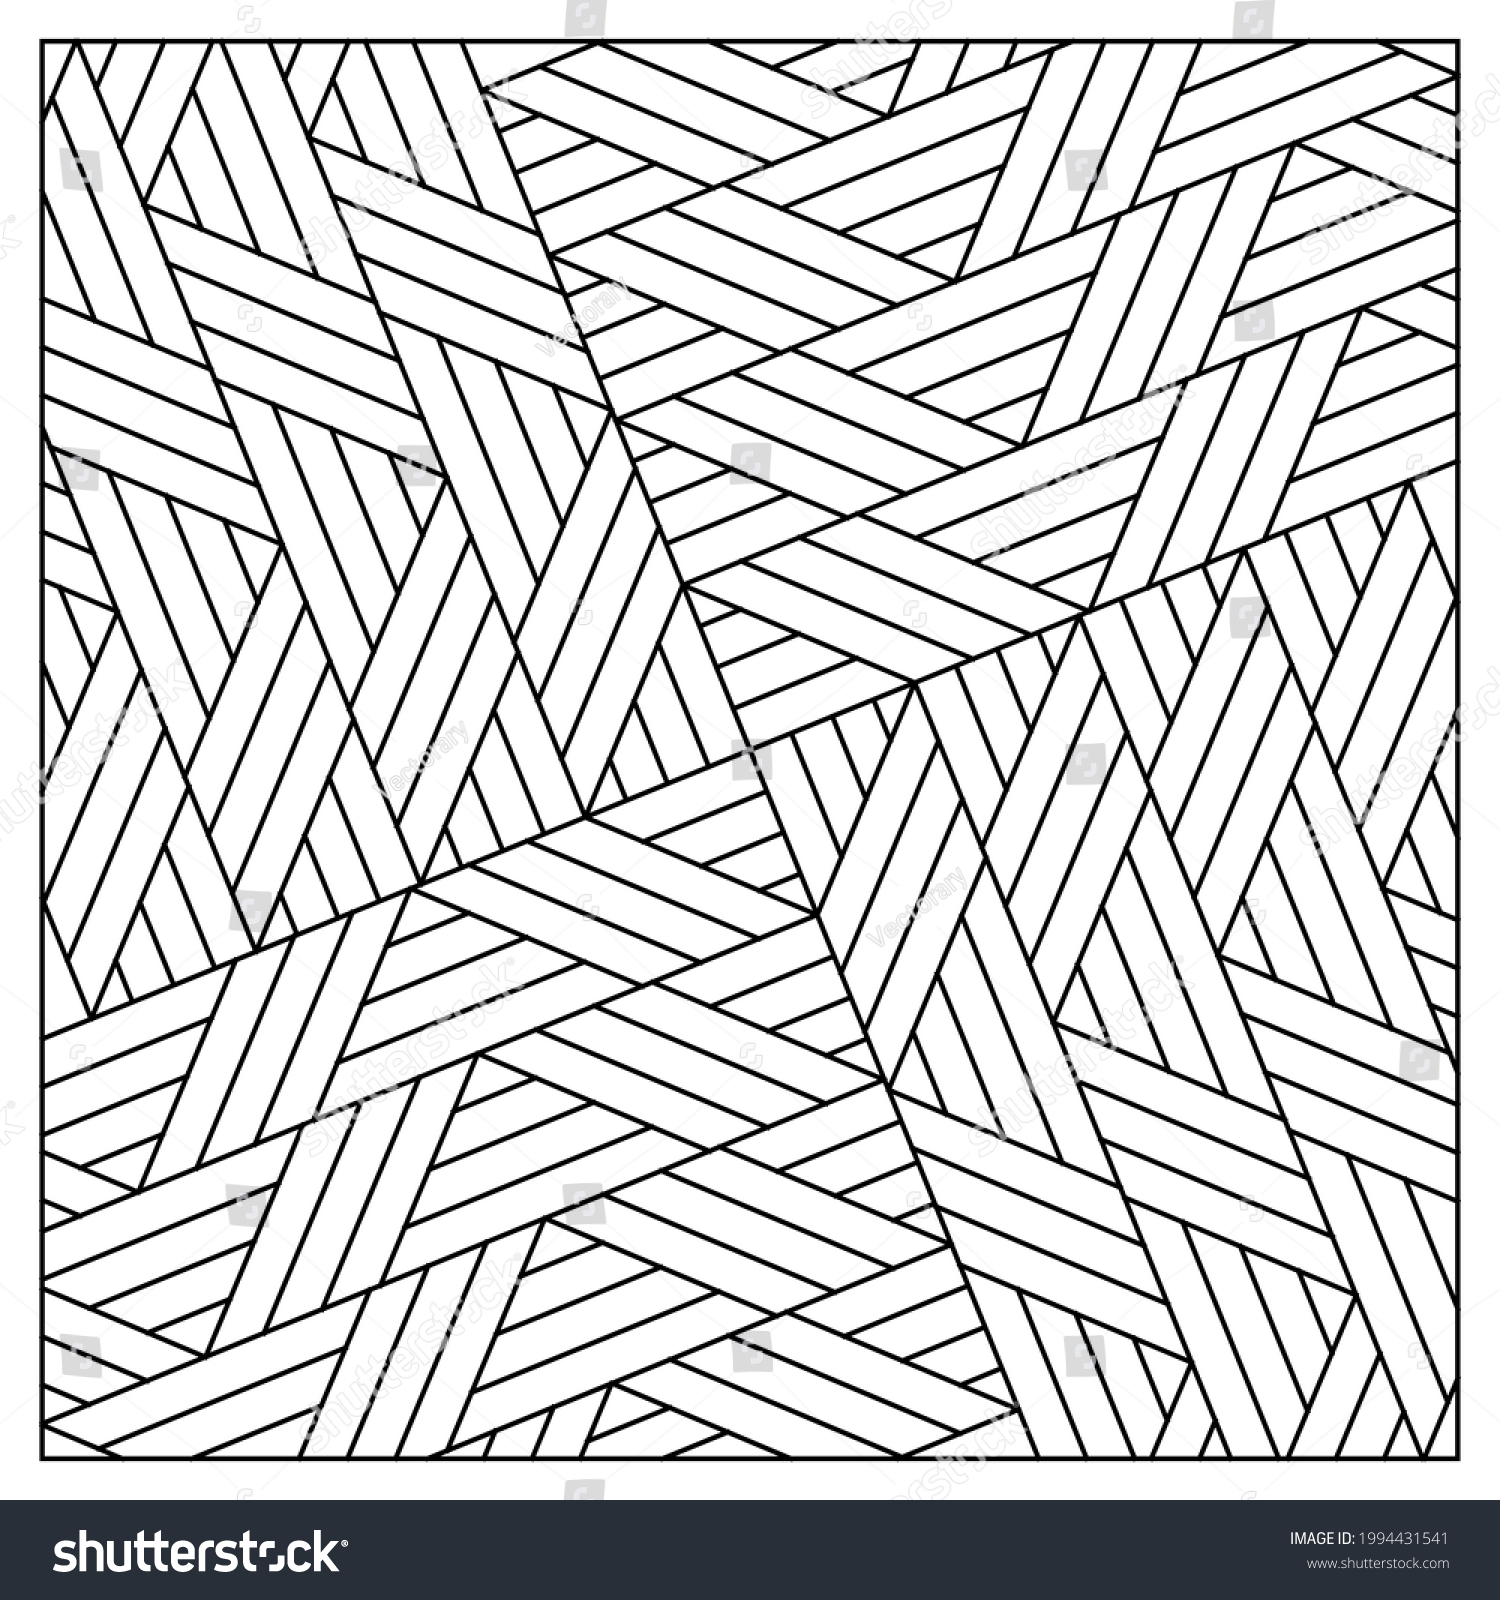 Fun coloring pages adultscoloring page abstract stock vector royalty free